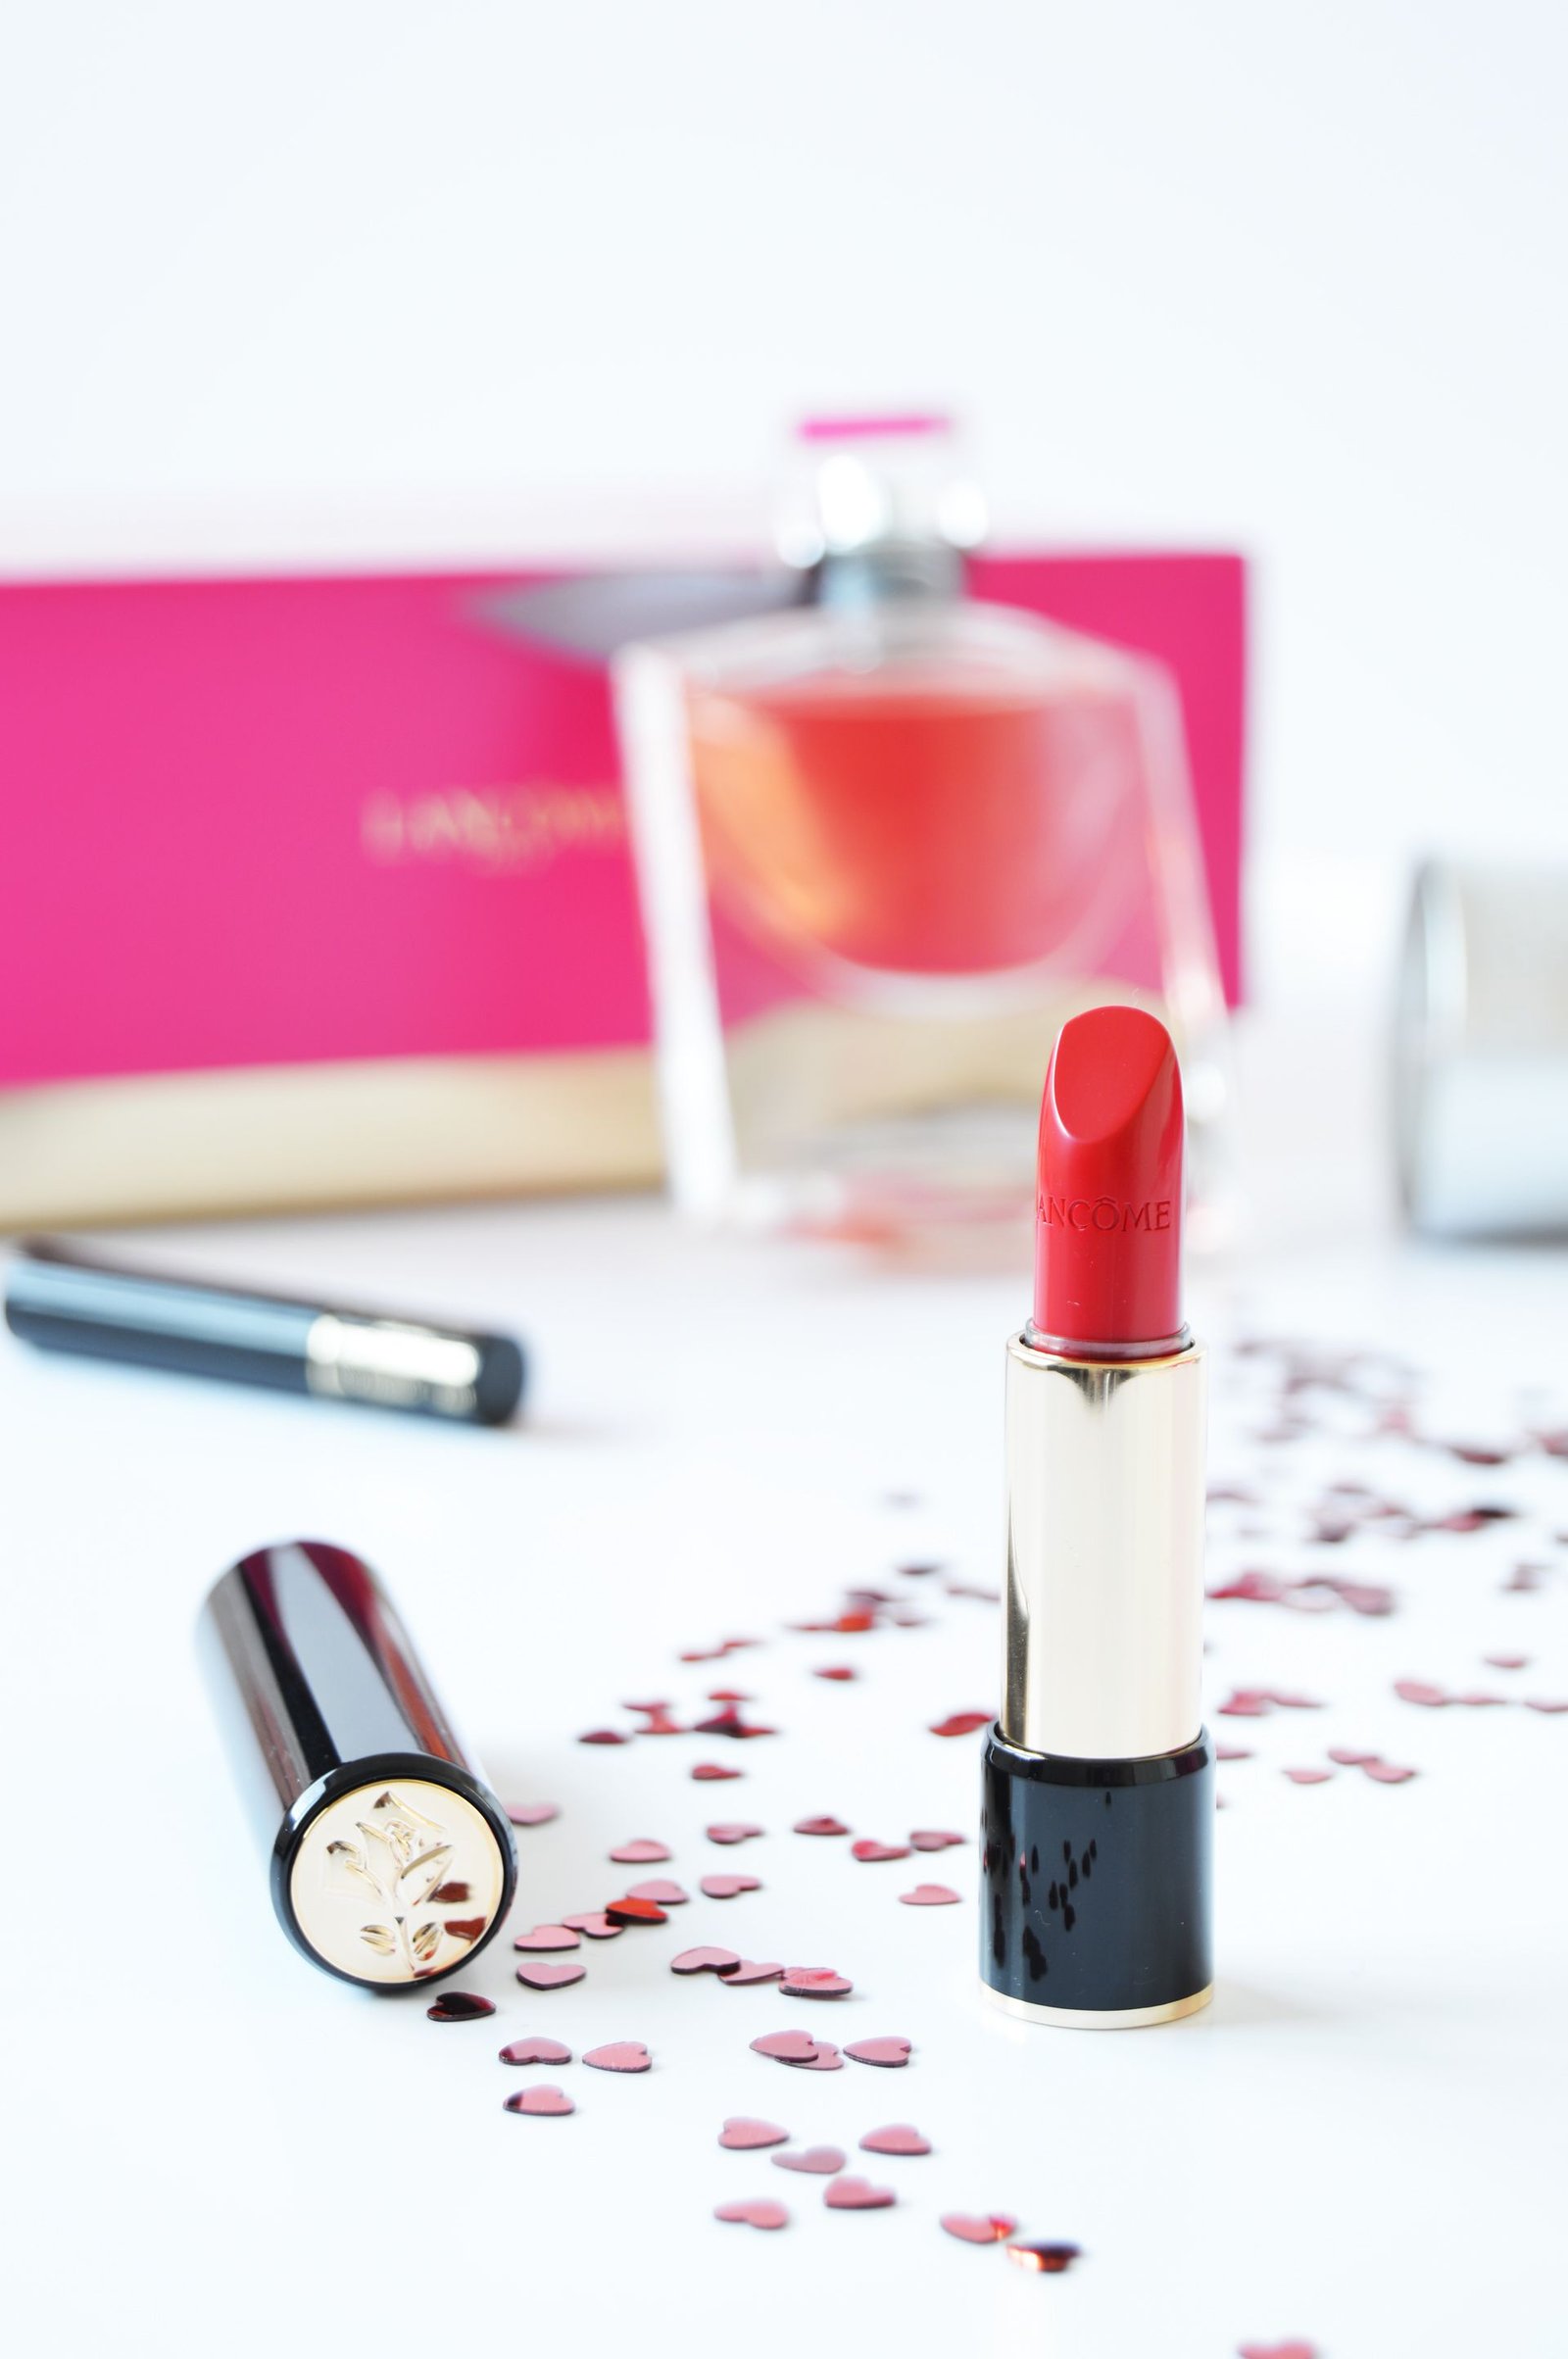 Lancôme L'Absolu Rouge 132 Caprice has cream finish. 132 Caprice is a true red with slight blue undertone. If you're looking for a red lipstick which could suit every complexion then this is what you need.